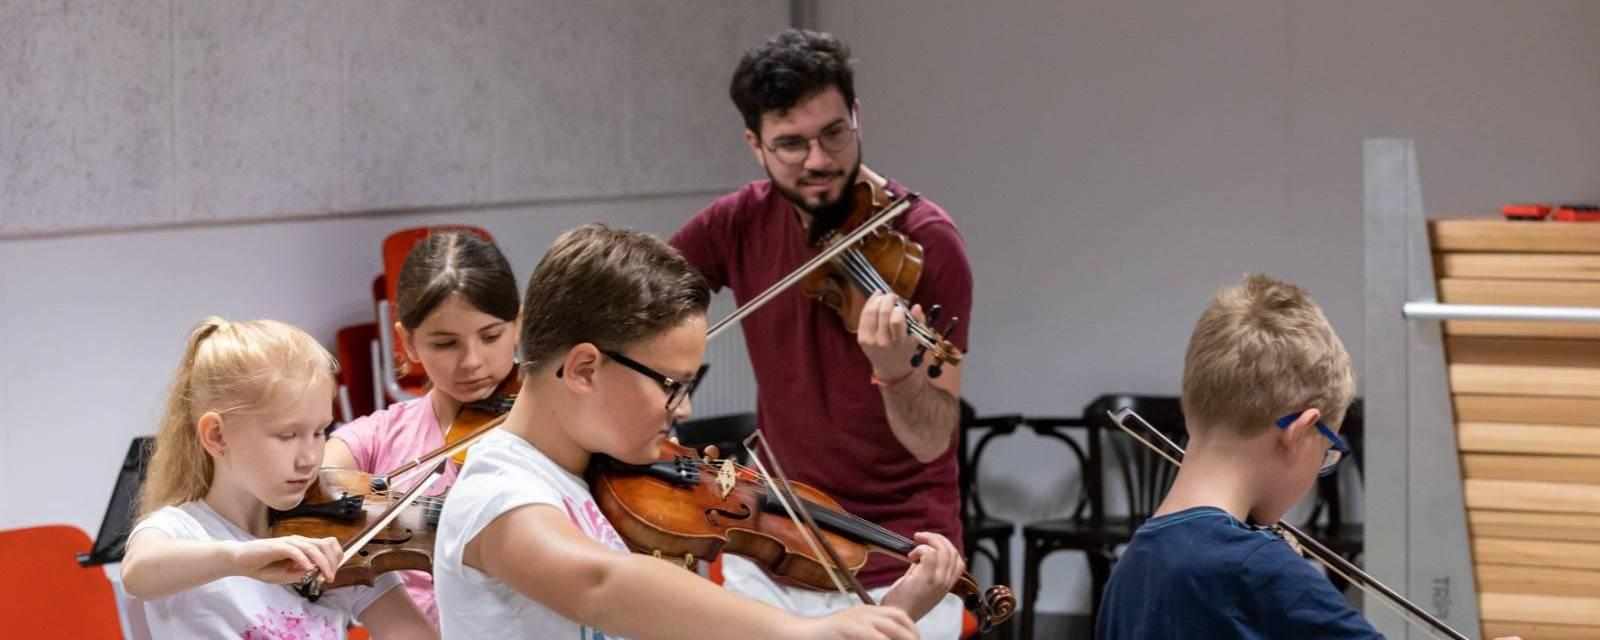 VIOLIN lessons for ALL ages and levels with a professional teacher